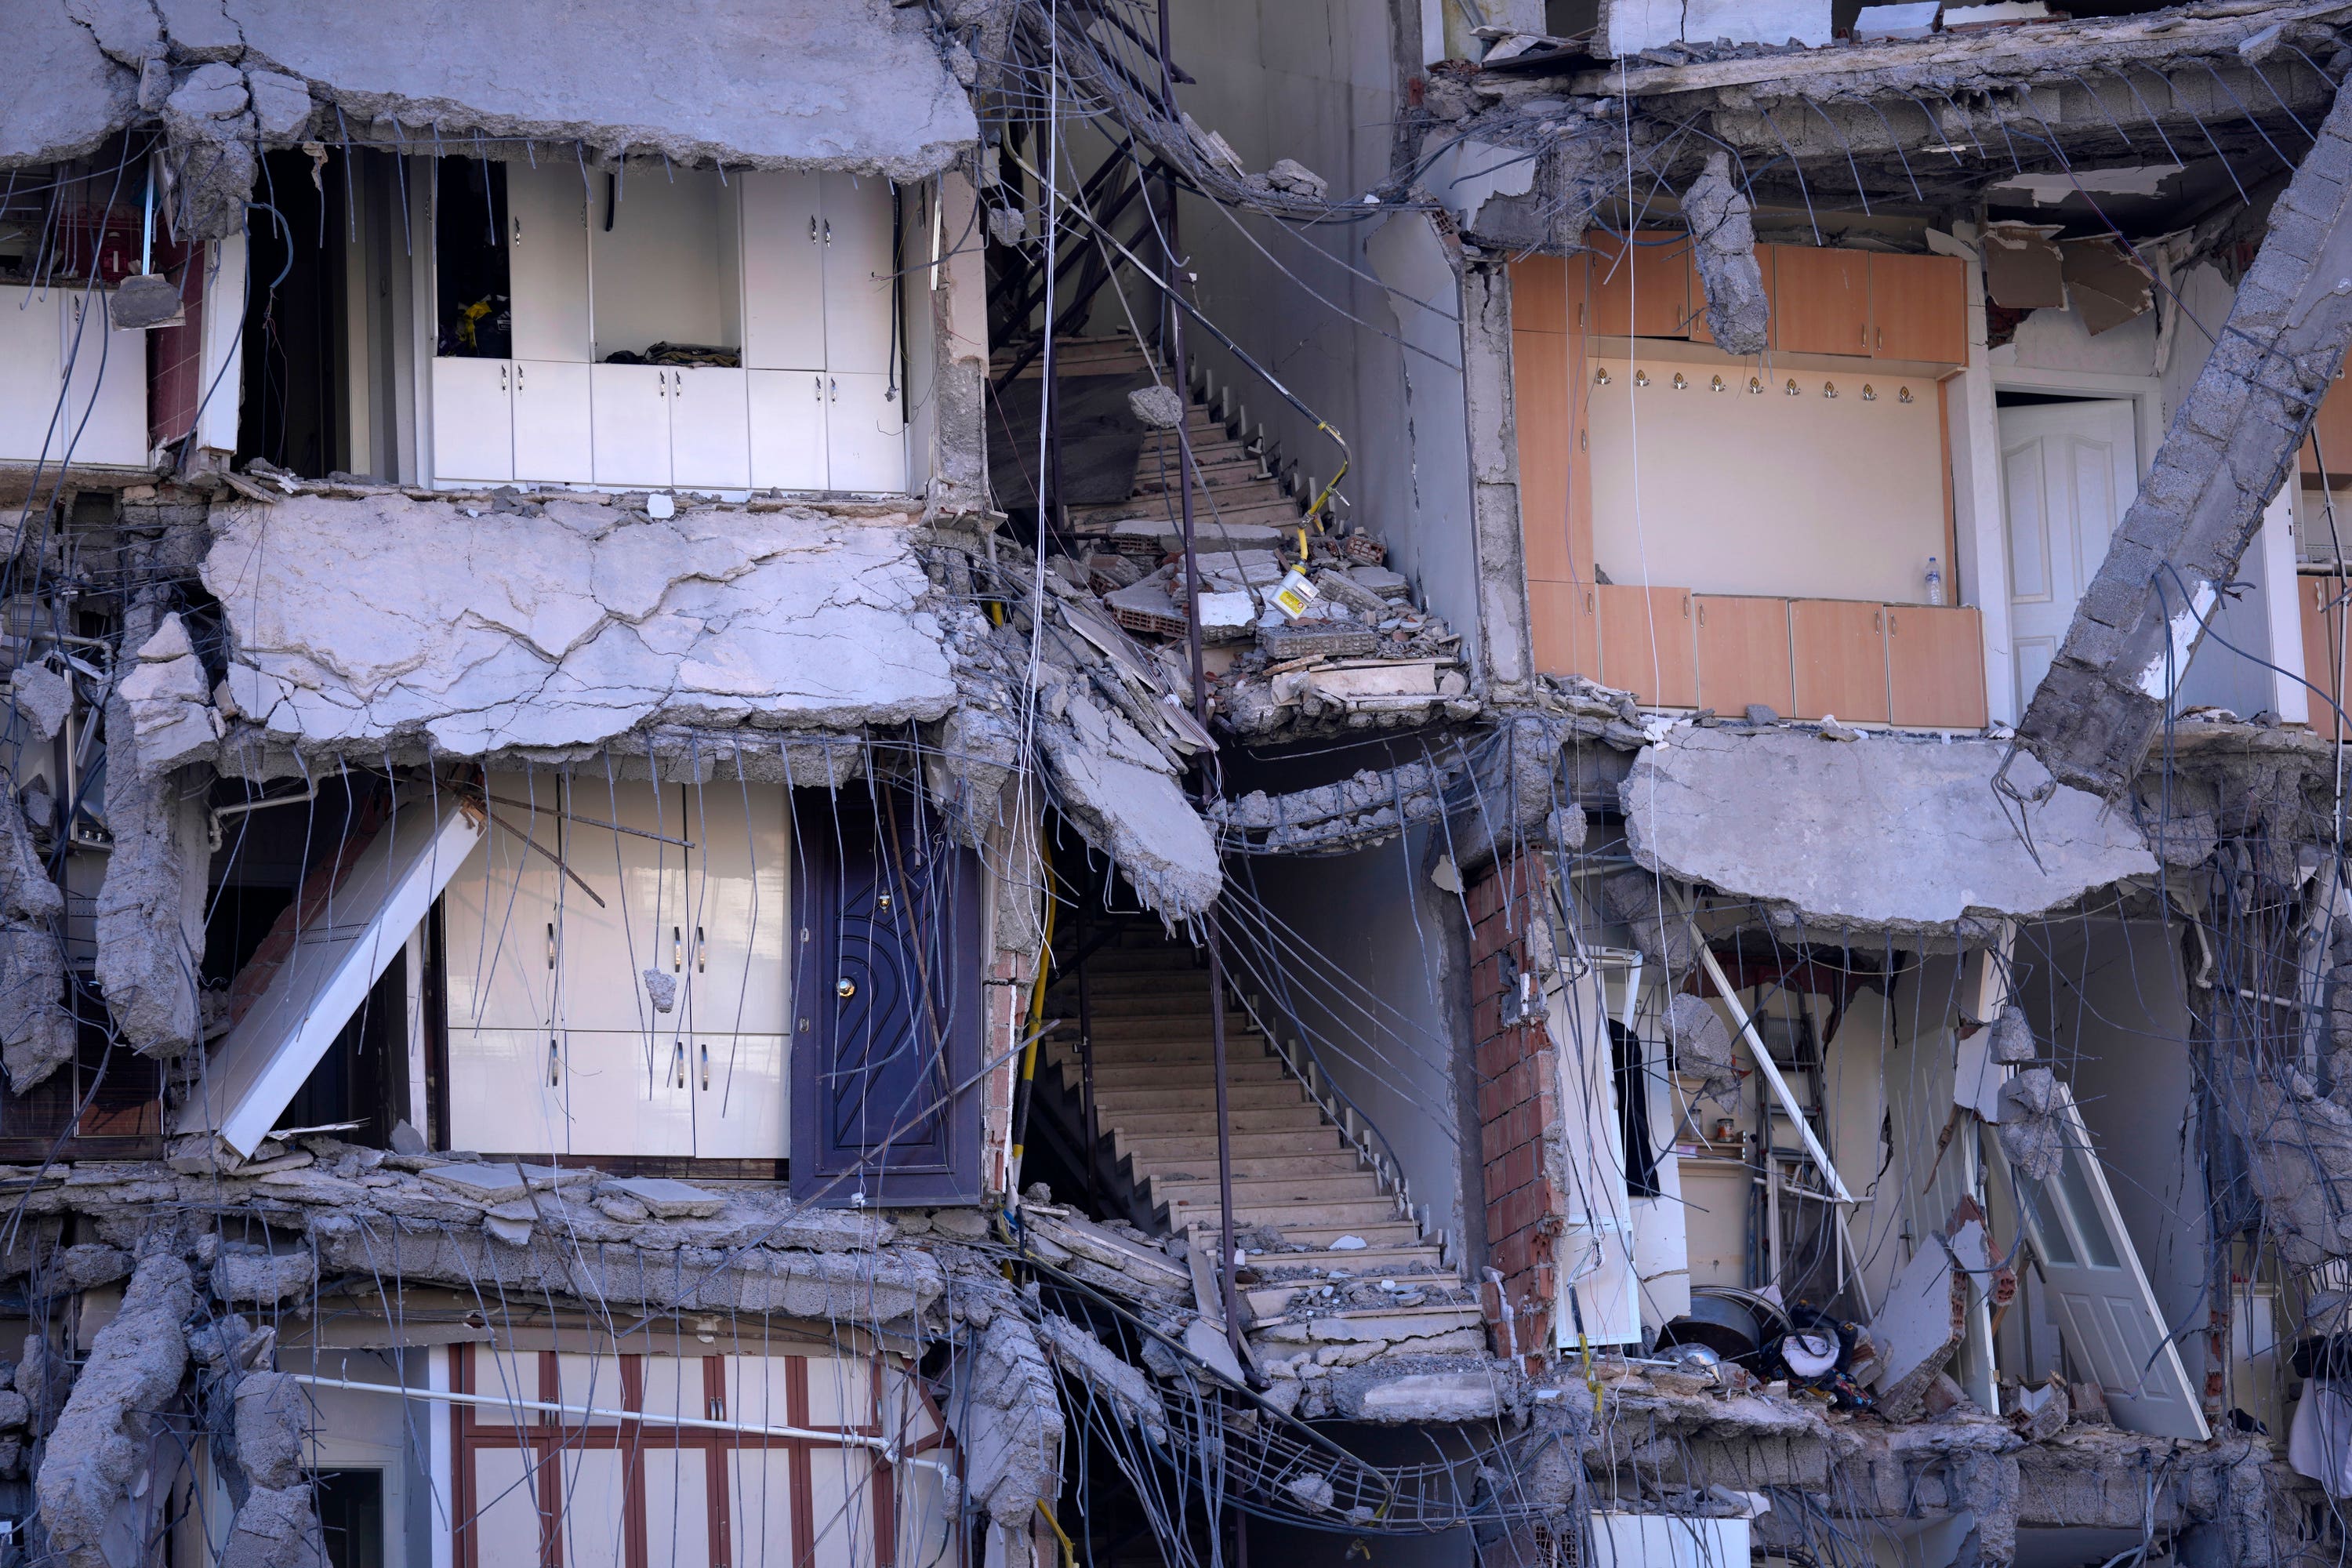 A view of a destroyed building in Gaziantep, southeastern Turkey.